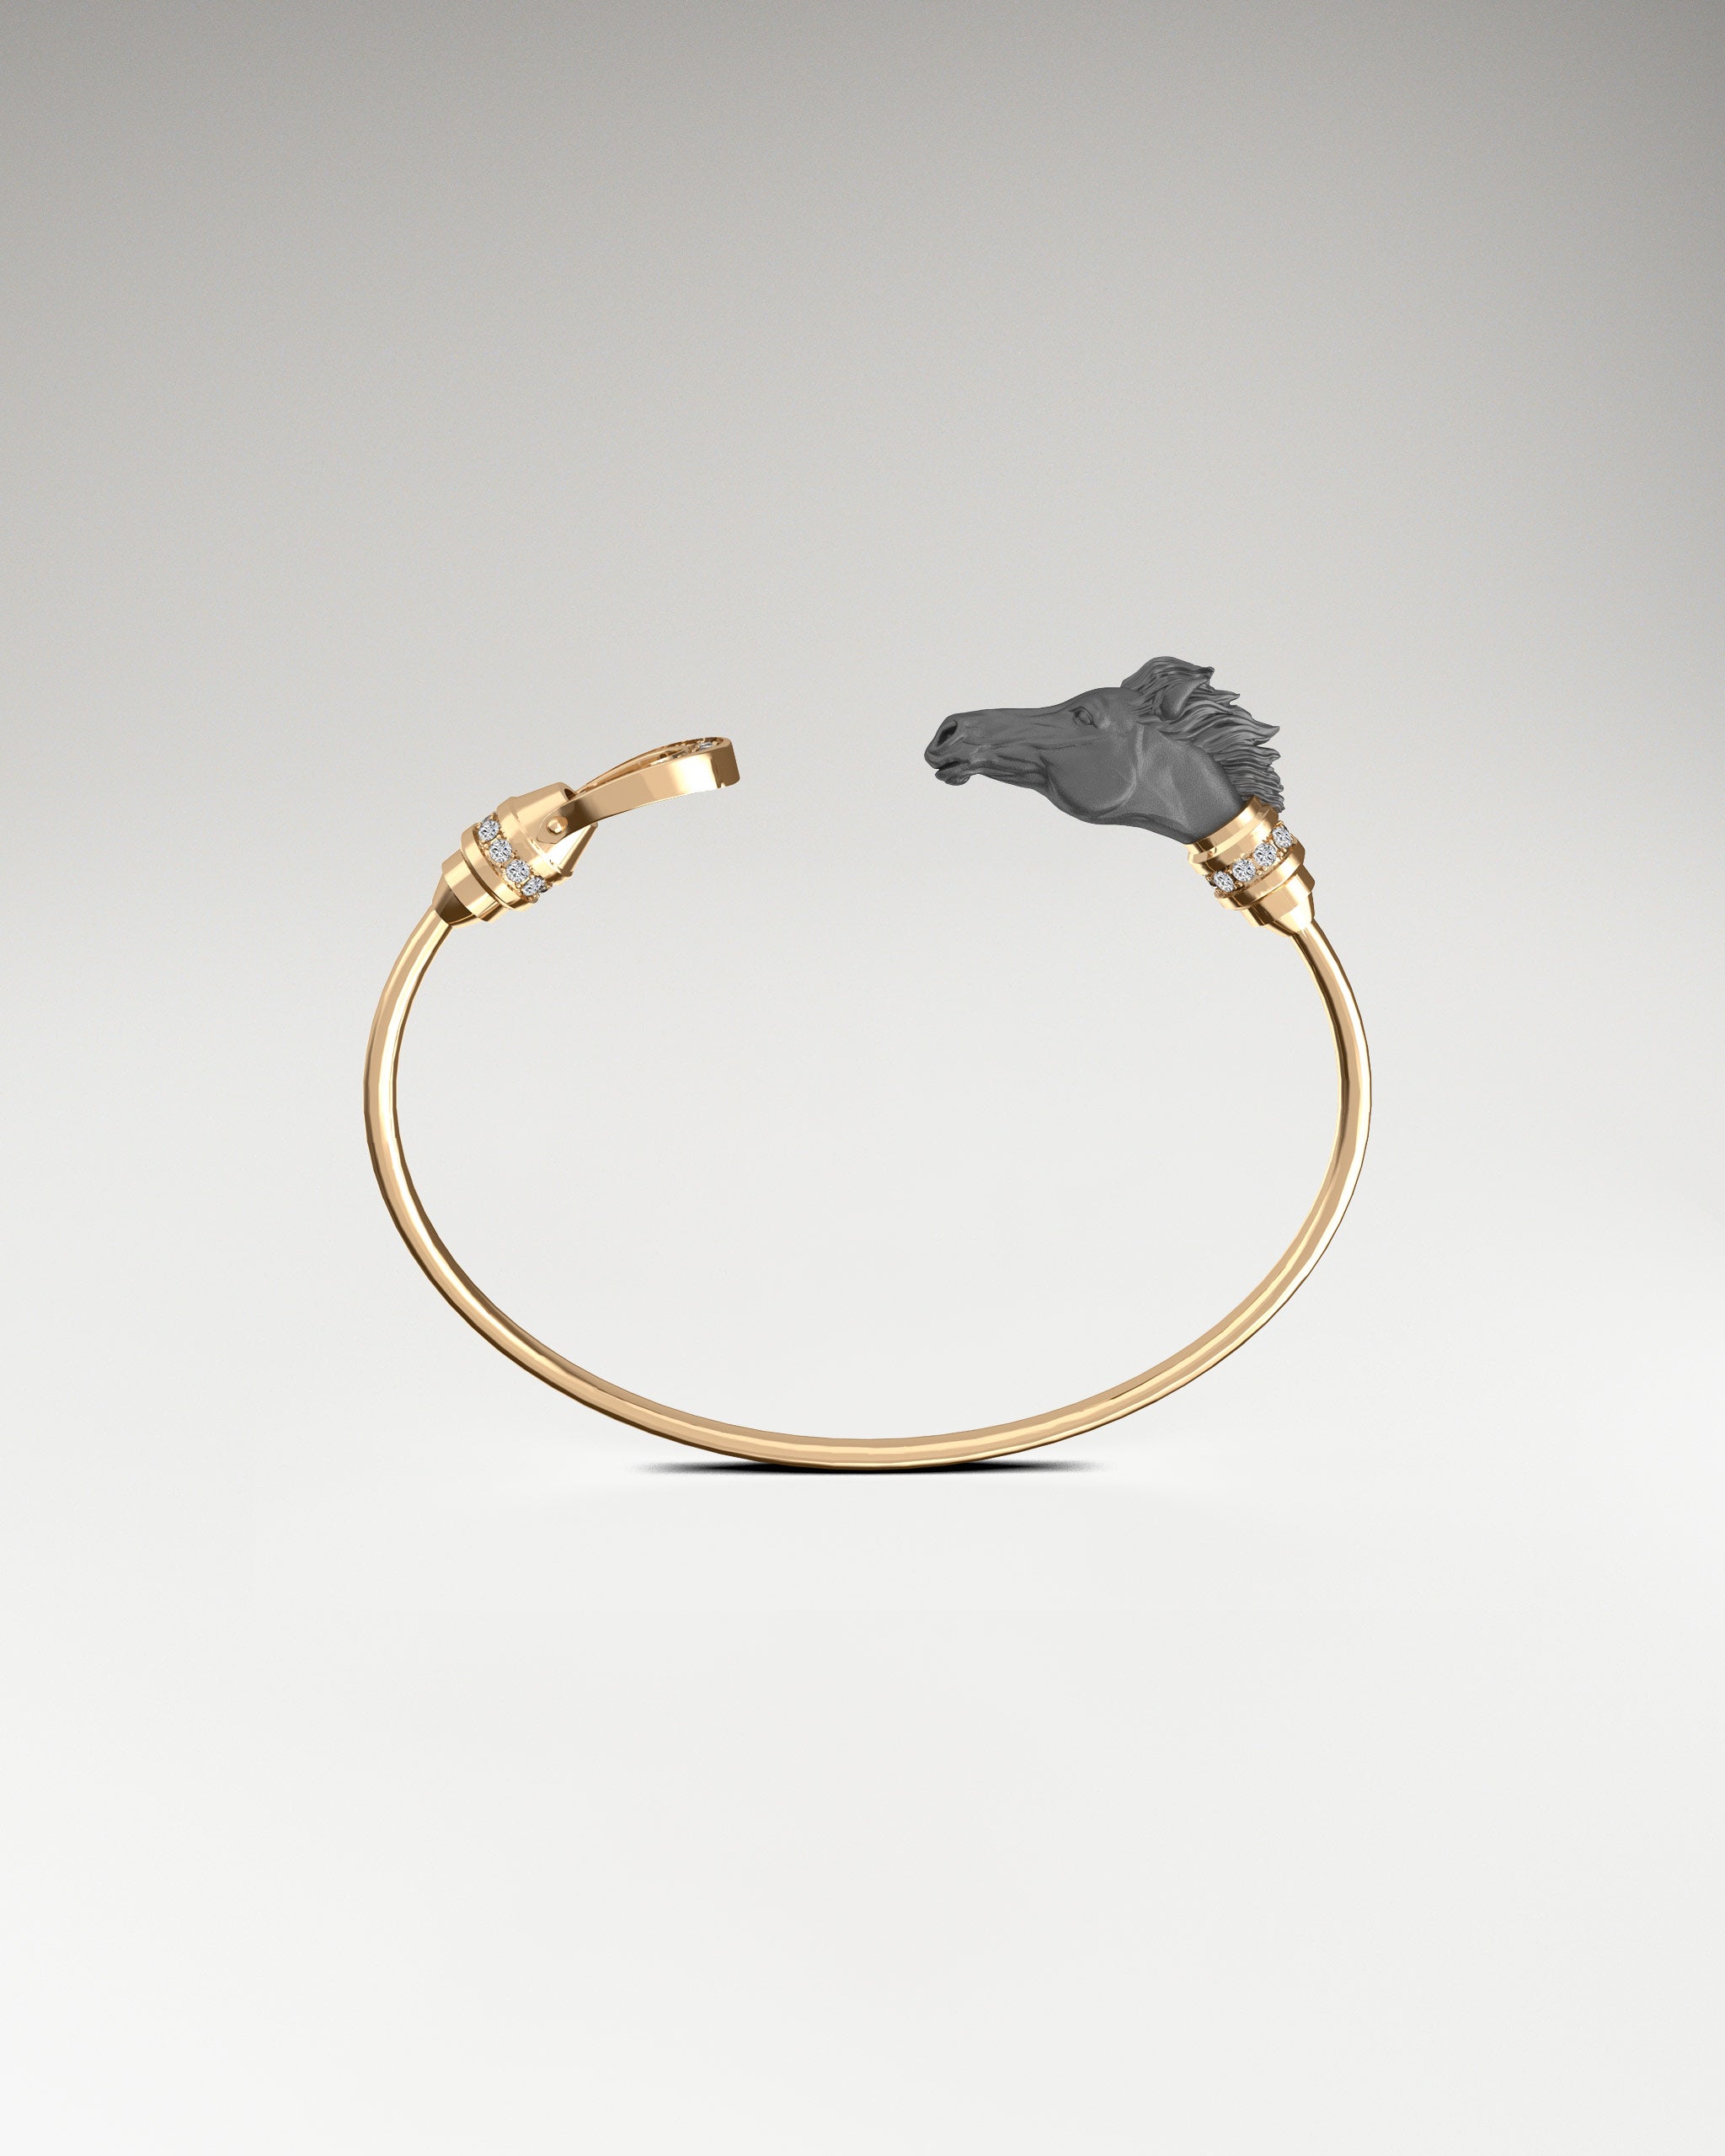 Horse Head Bracelet in Gold and Diamonds